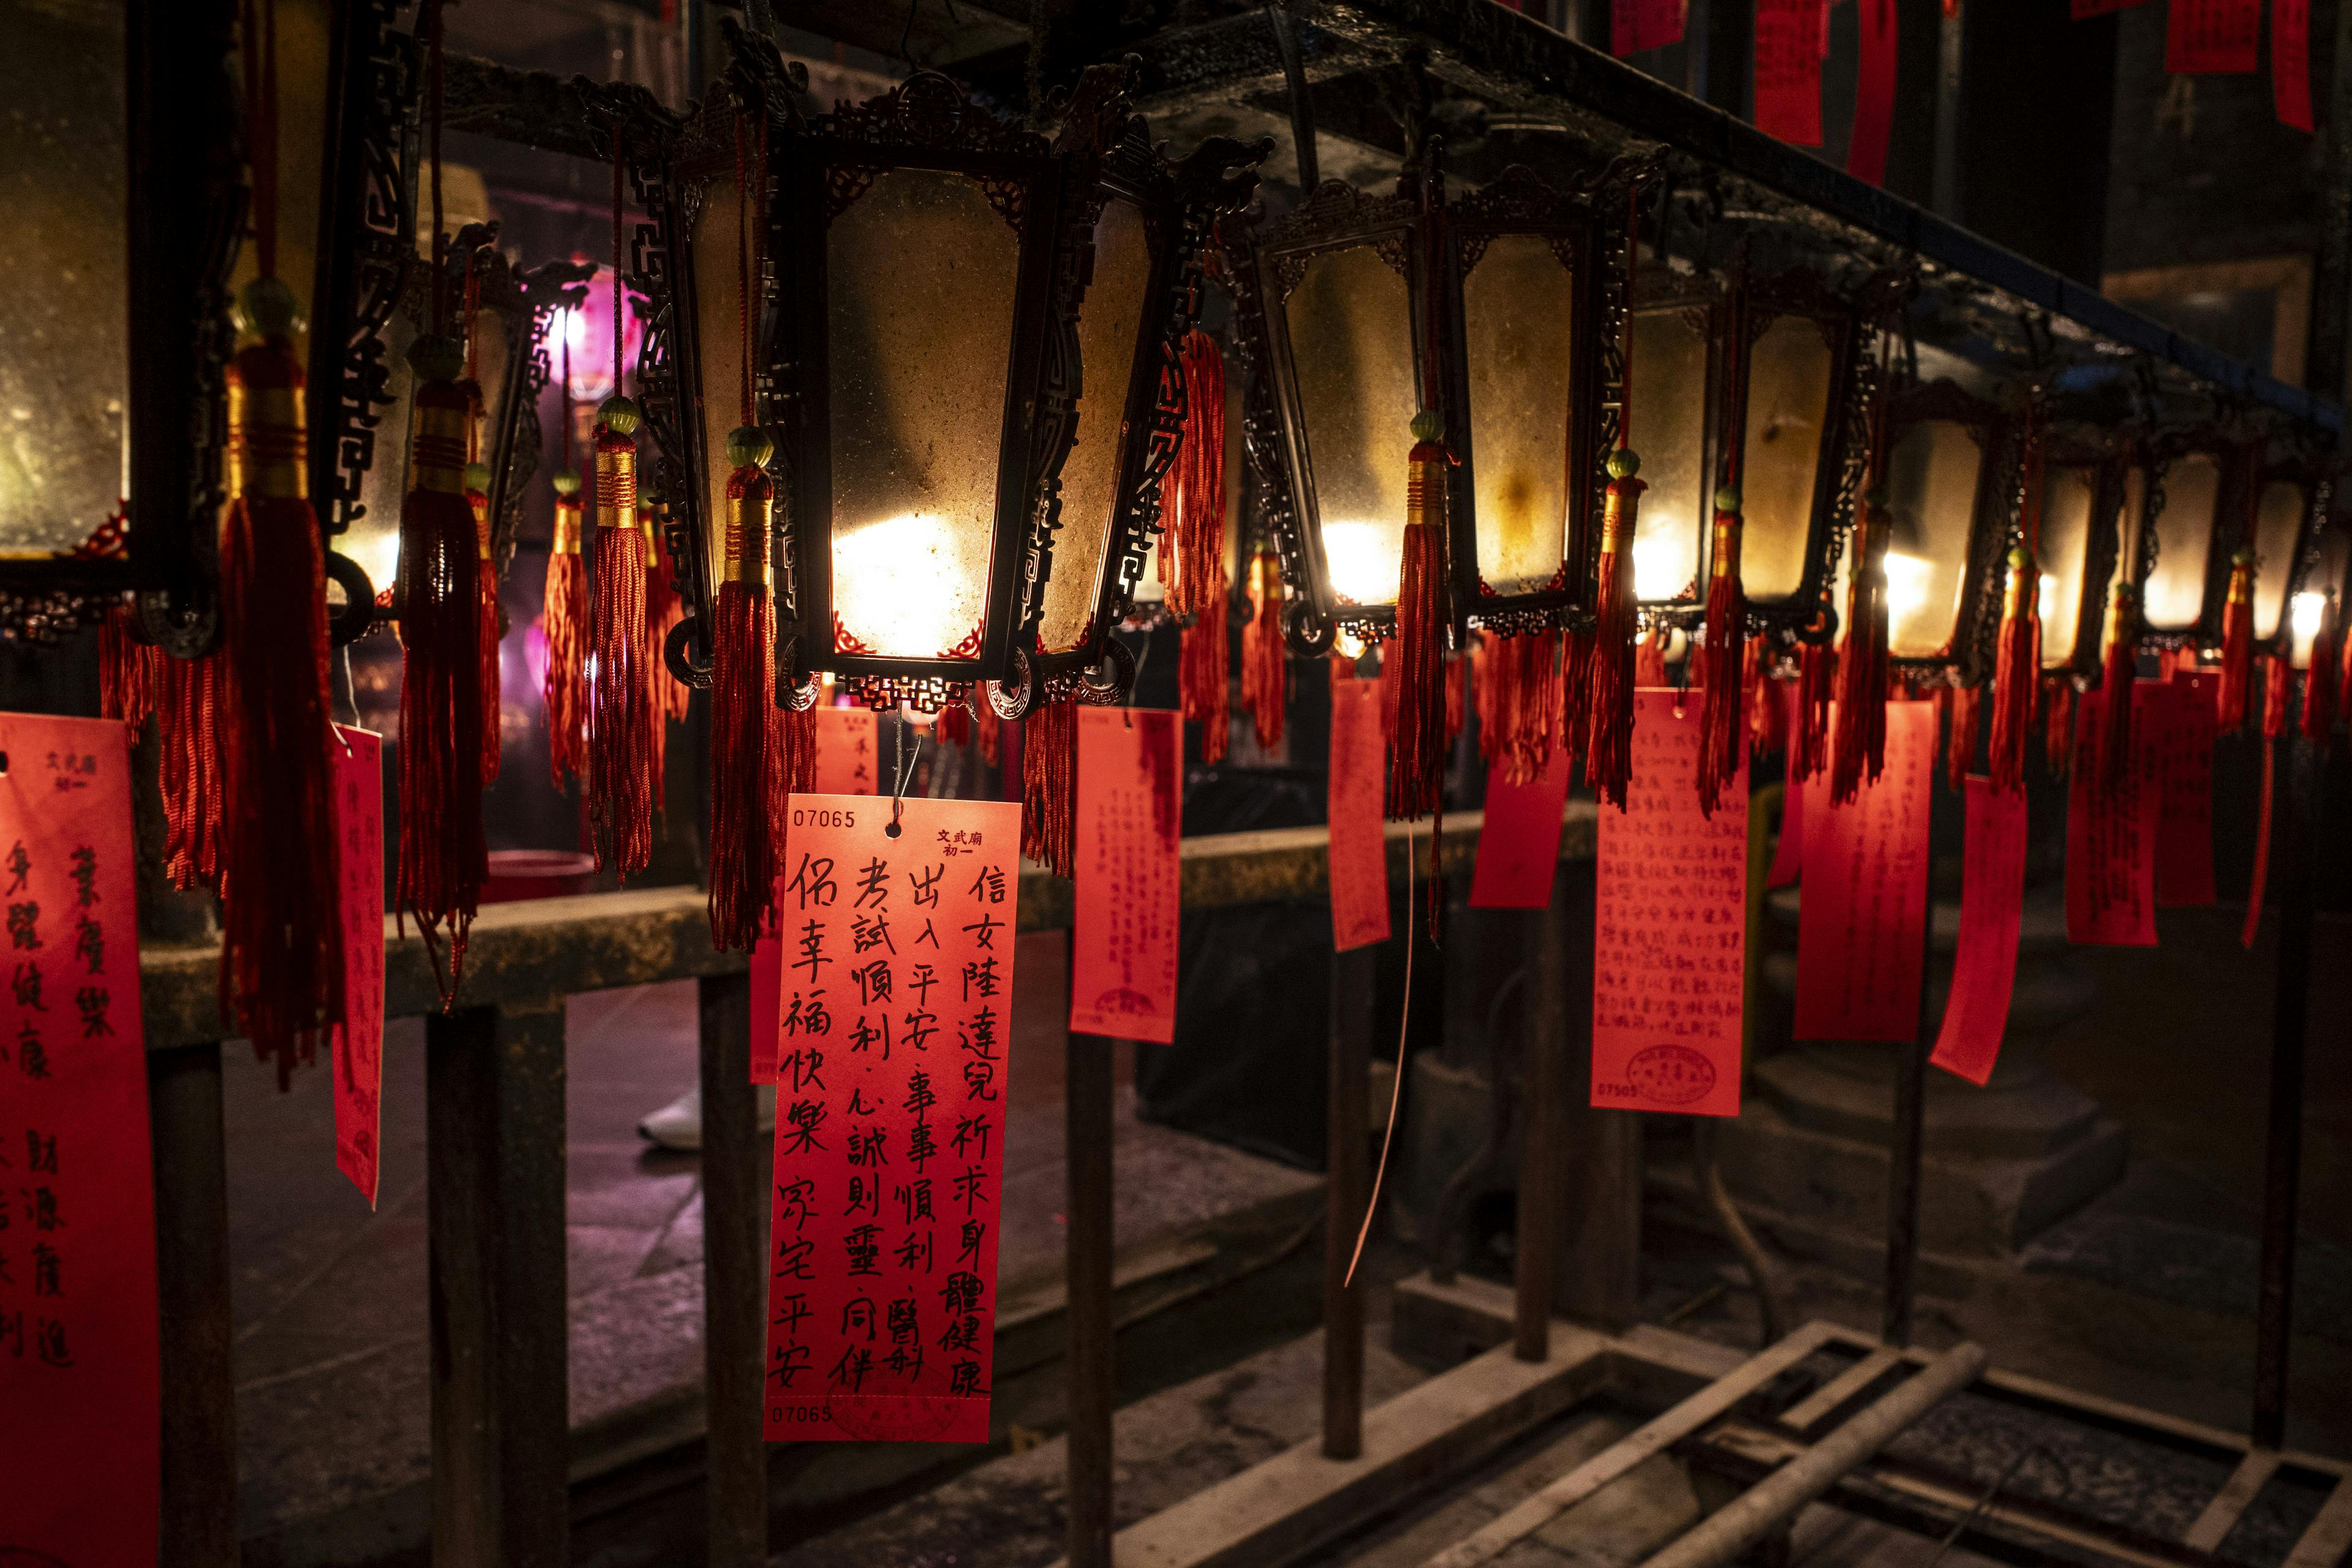 Lantern written with people’s wishes for the new year are seen at the Man Mo Temple, Hong Kong. 